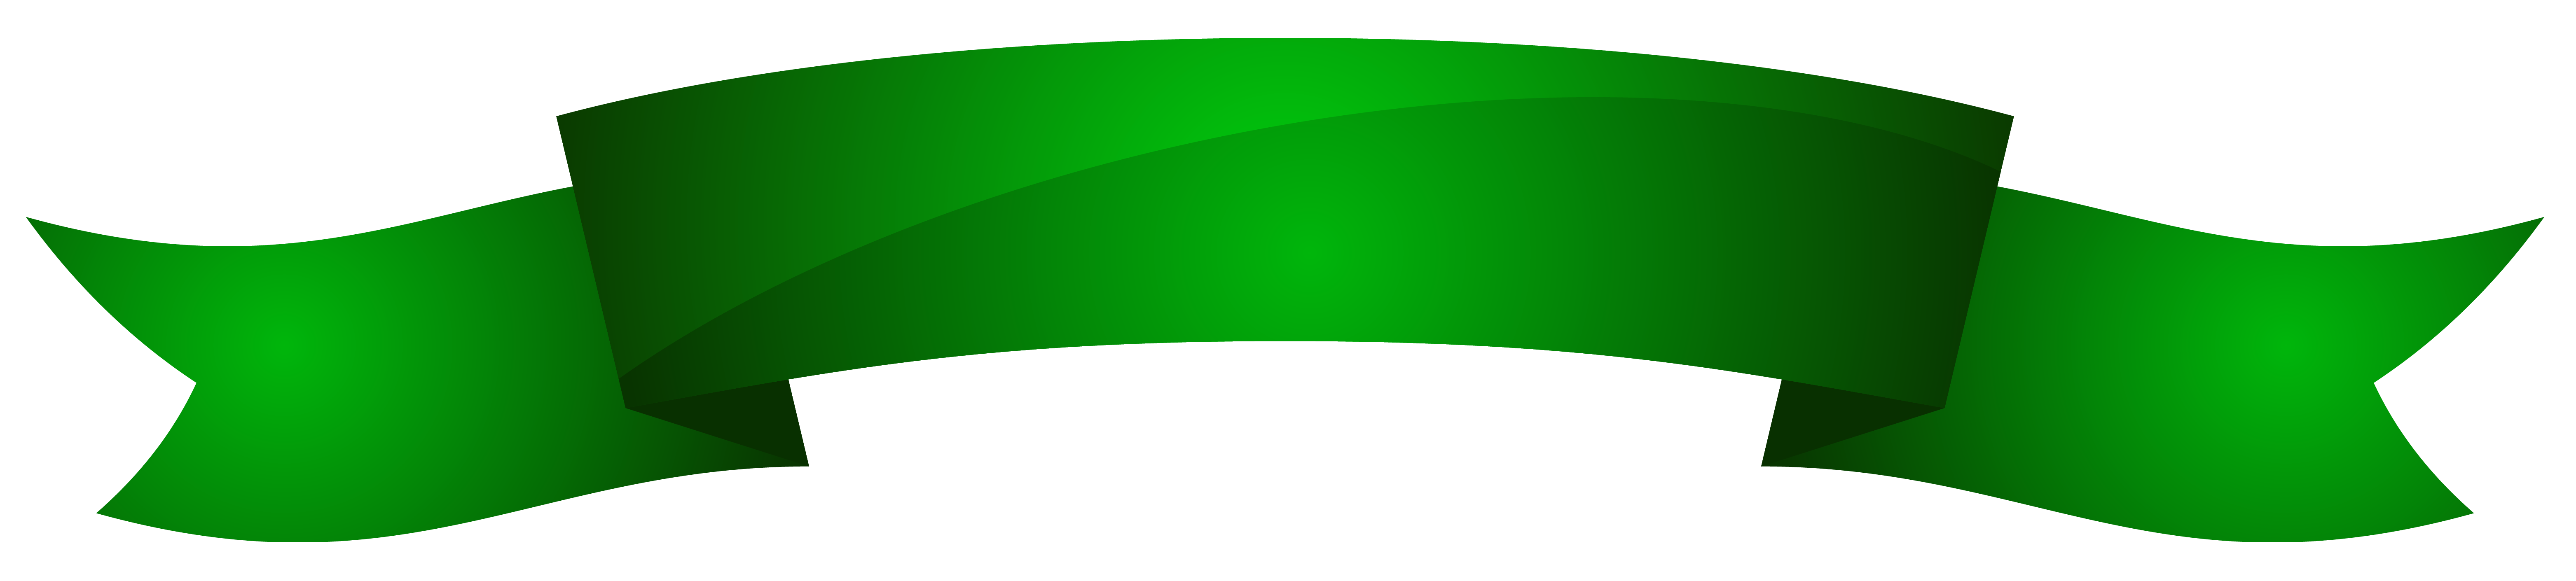 Green Banner Clipart PNG Image